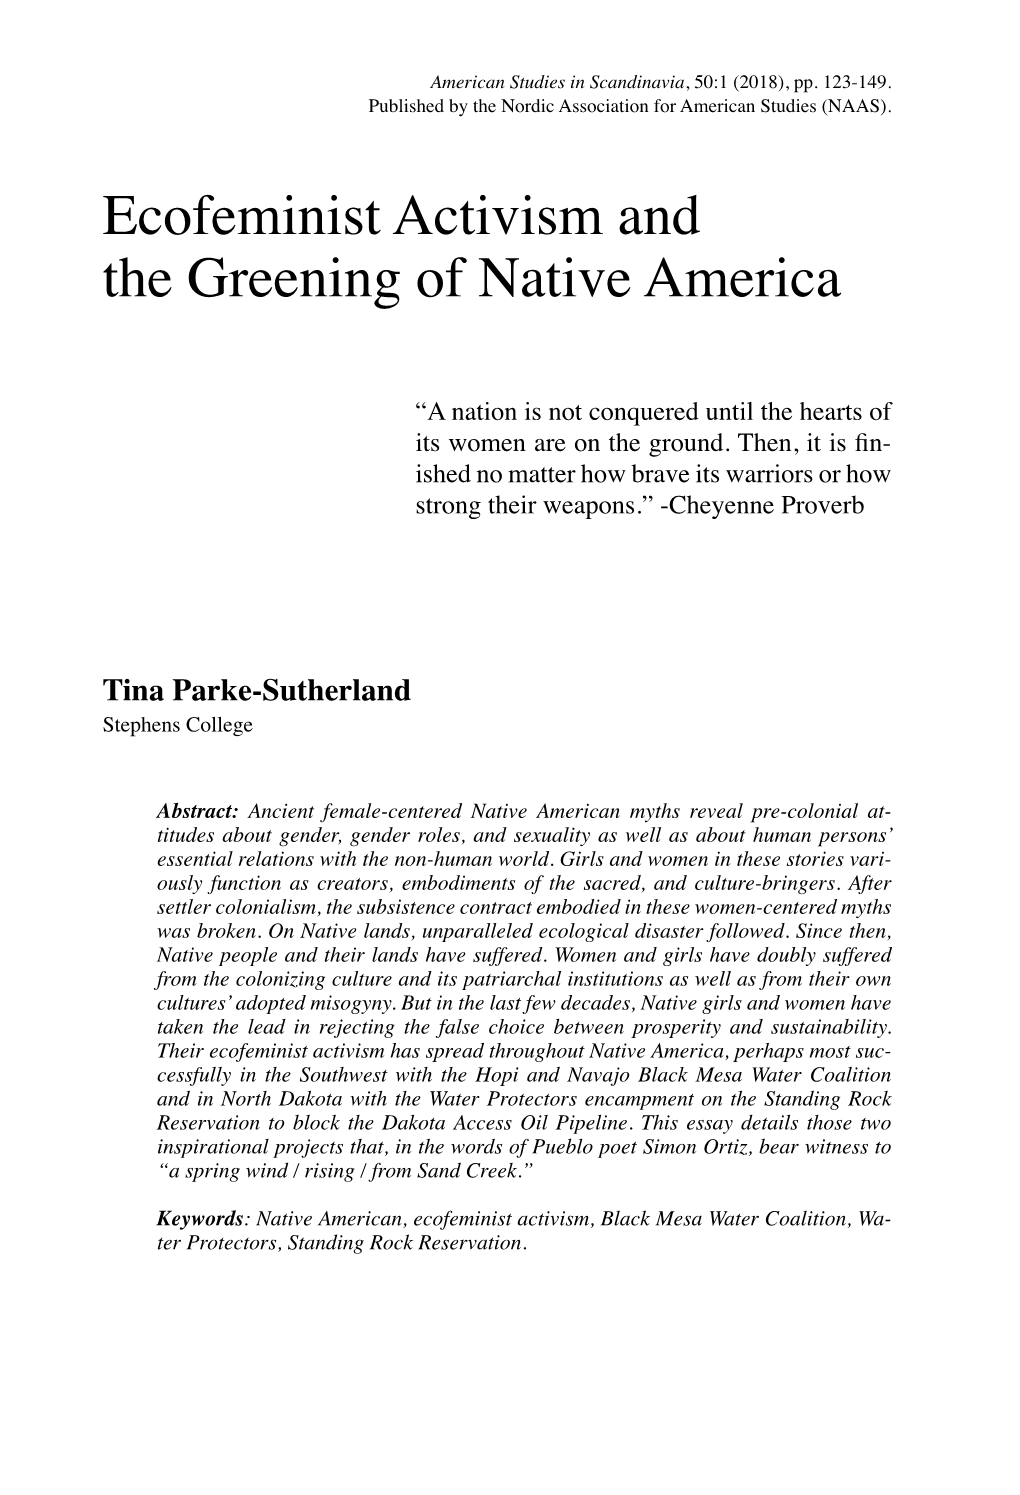 Ecofeminist Activism and the Greening of Native America